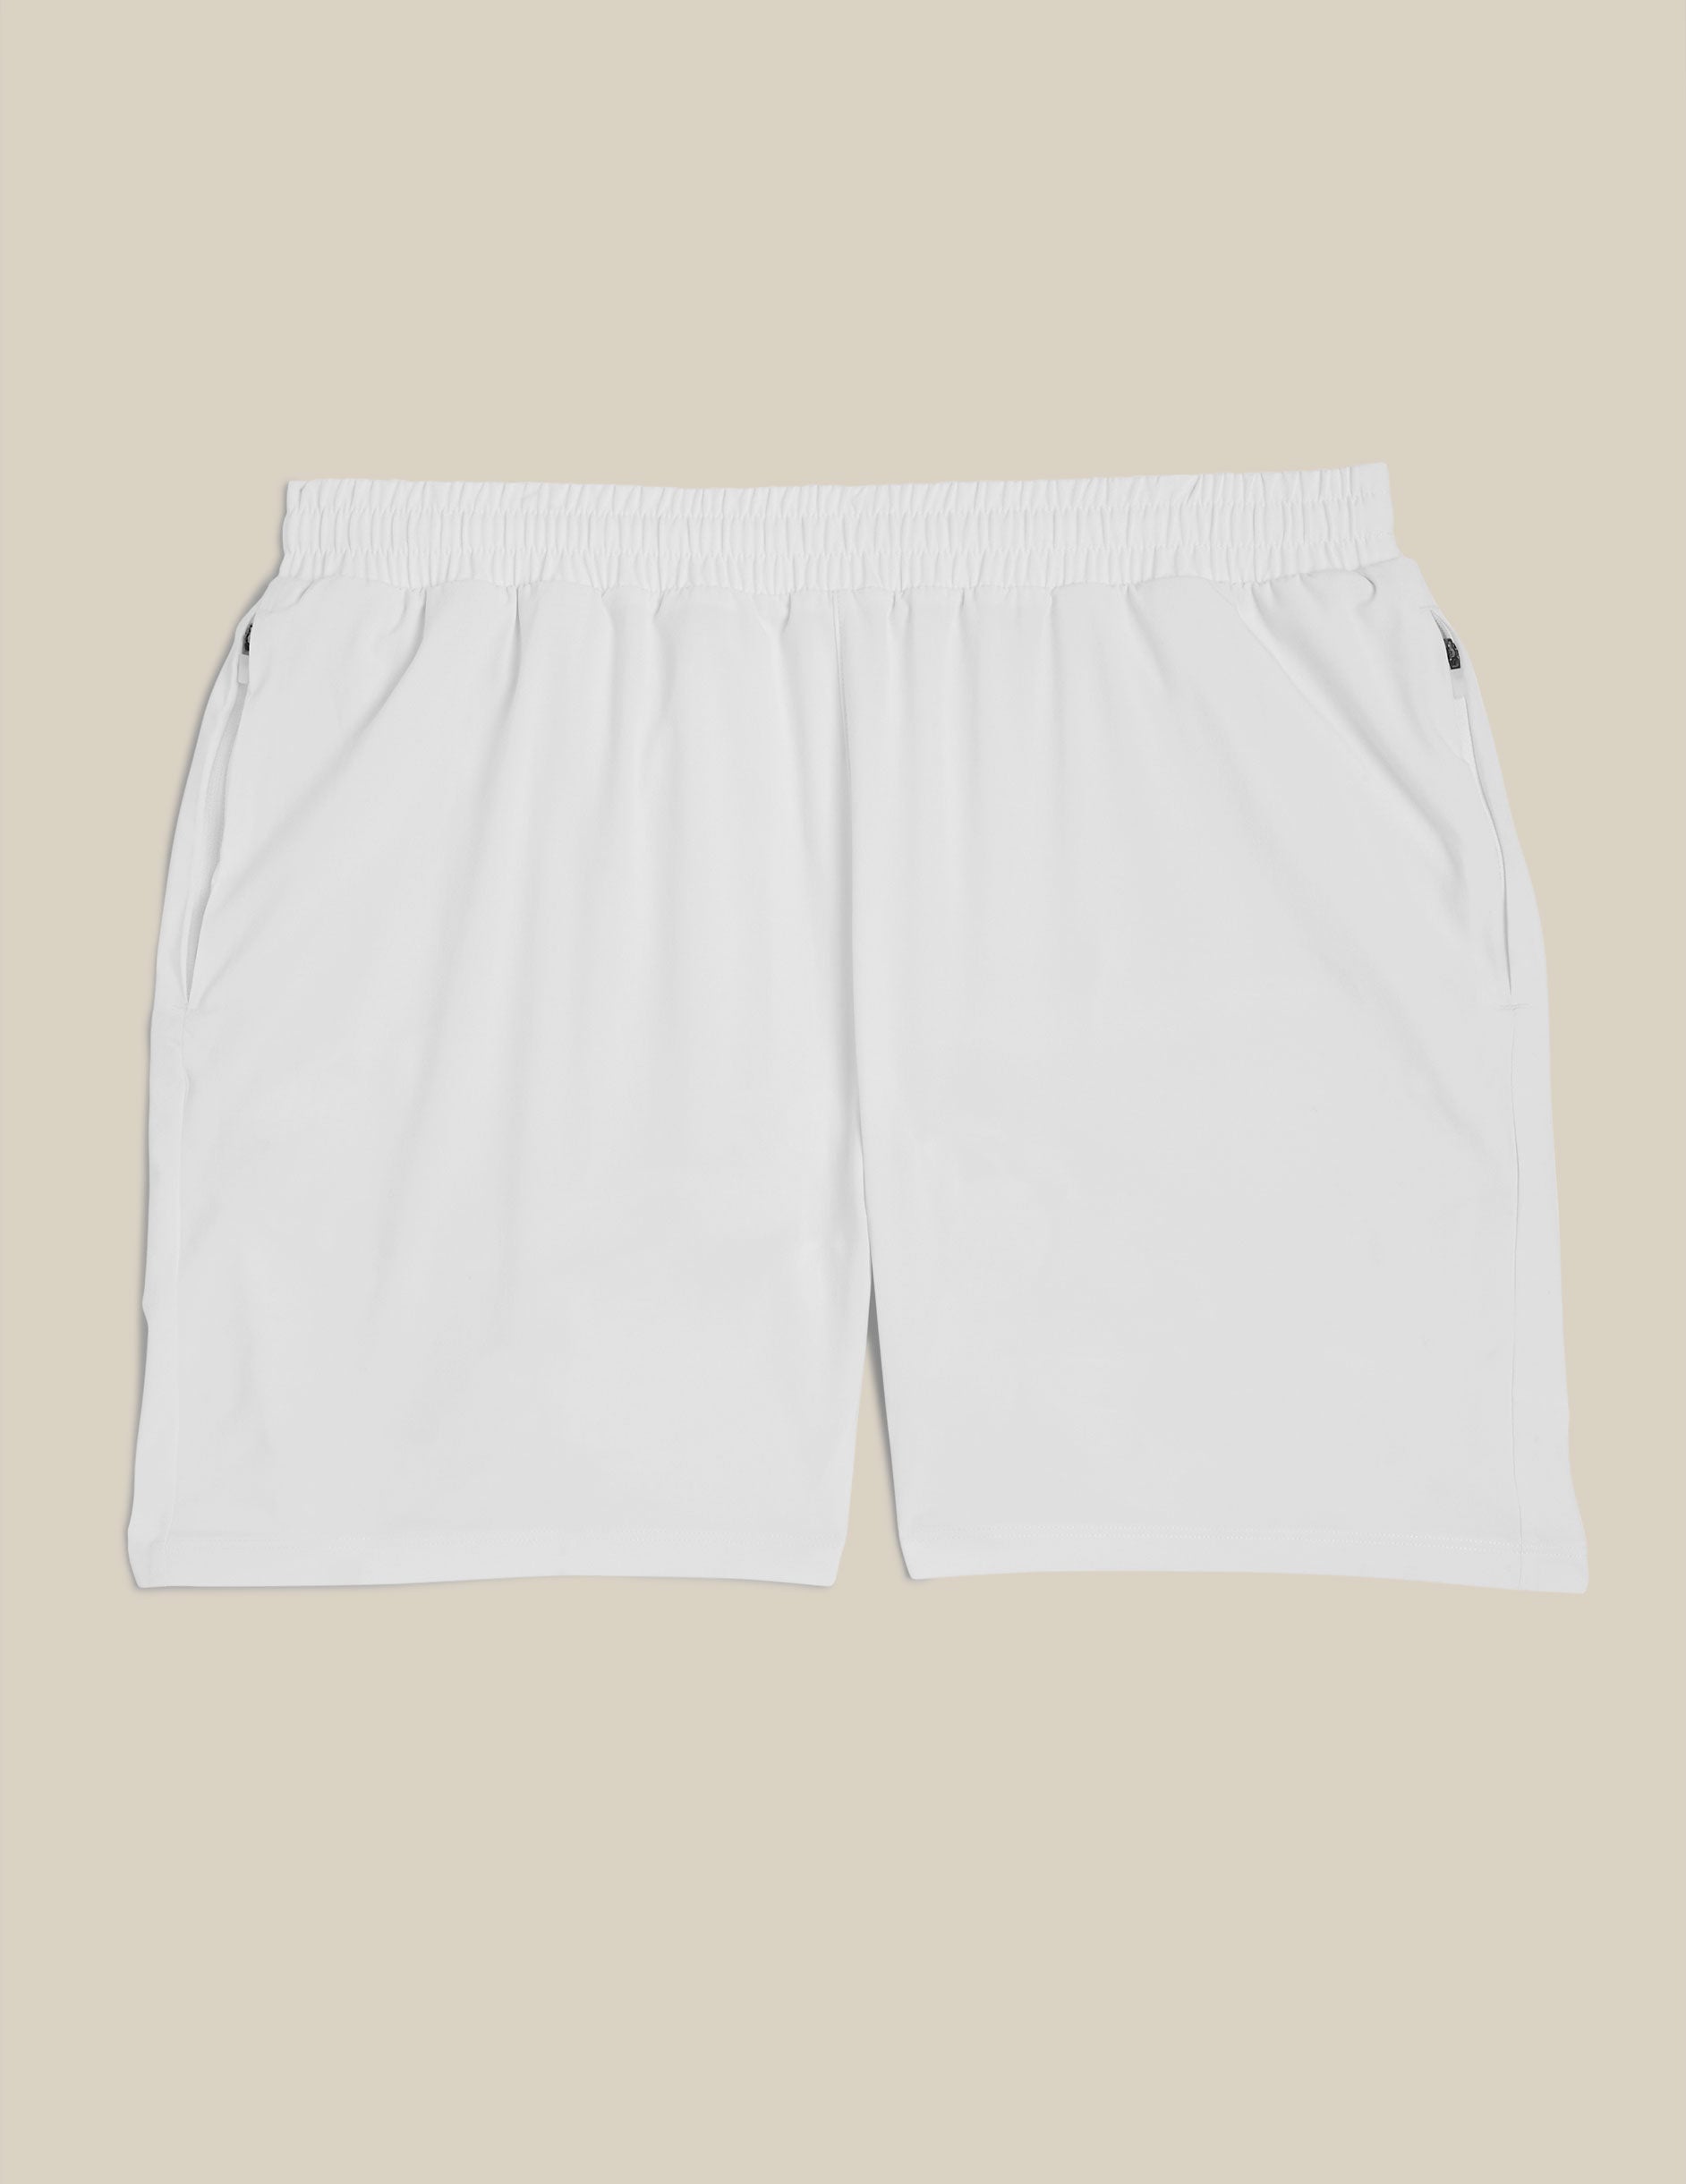 white mens lined shorts.